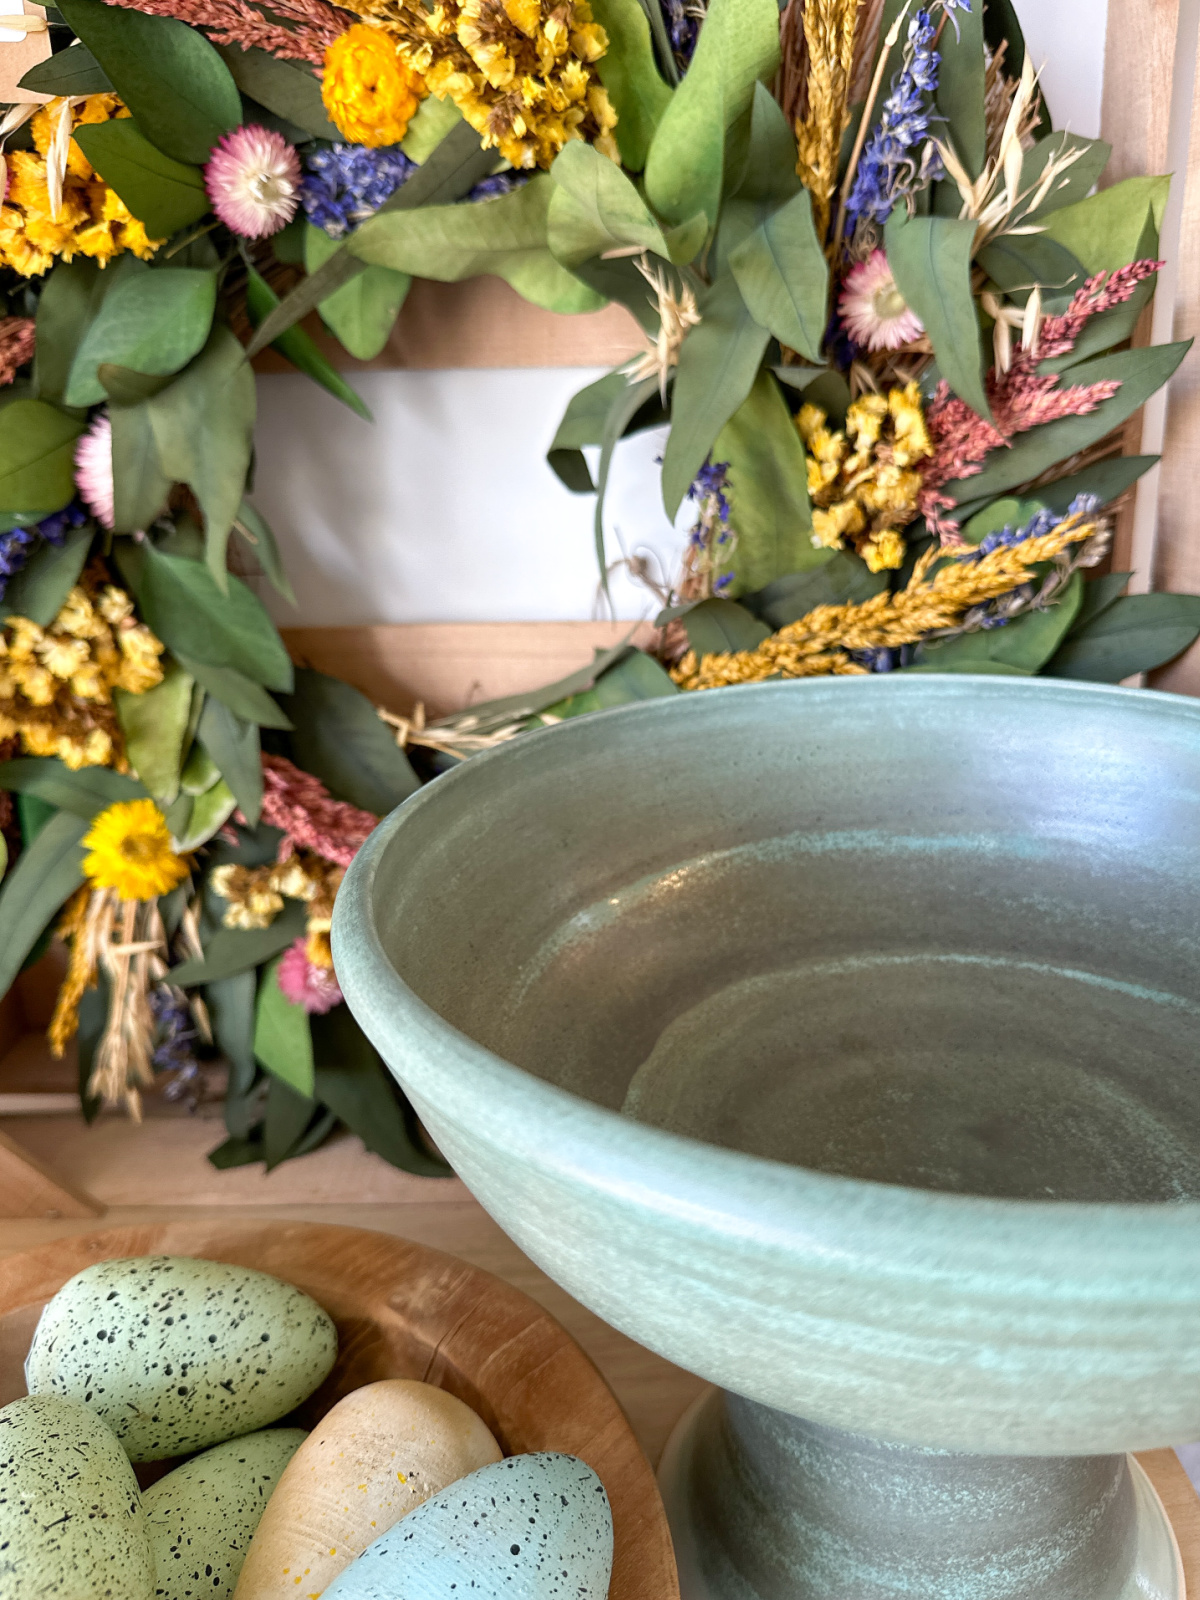 Pretty green bowl next to colorful eggs and a wildflower wreath.